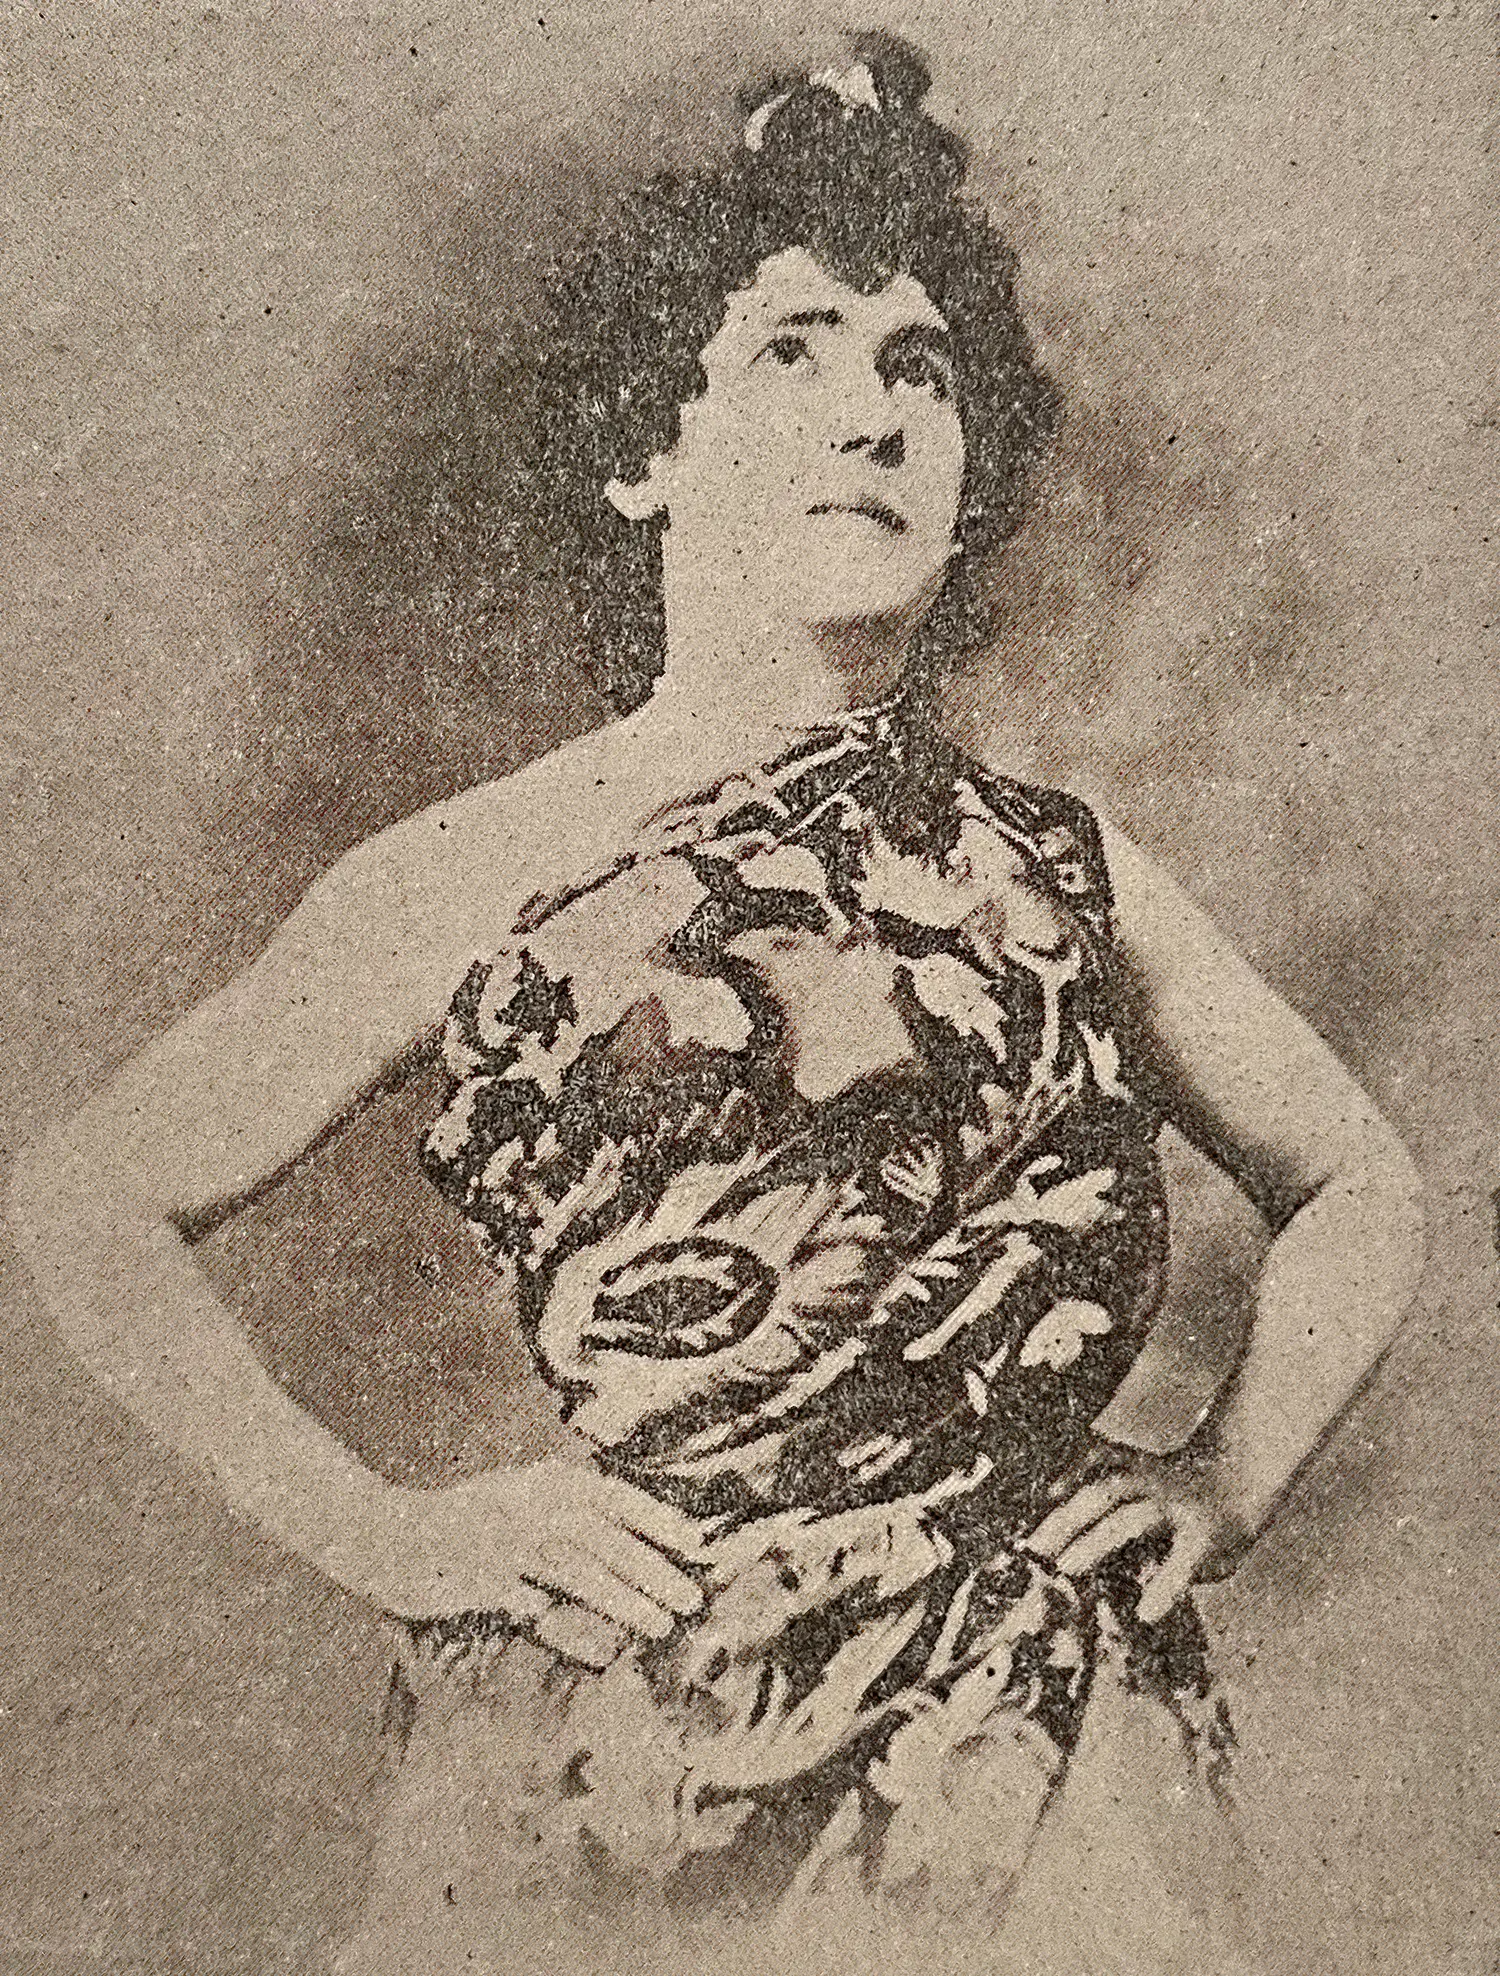 A grainy old photograph of a feminine-presenting person with curly hair wearing an intricately patterned garment. The person stands with their hands on their hips, contemplatively looking up.